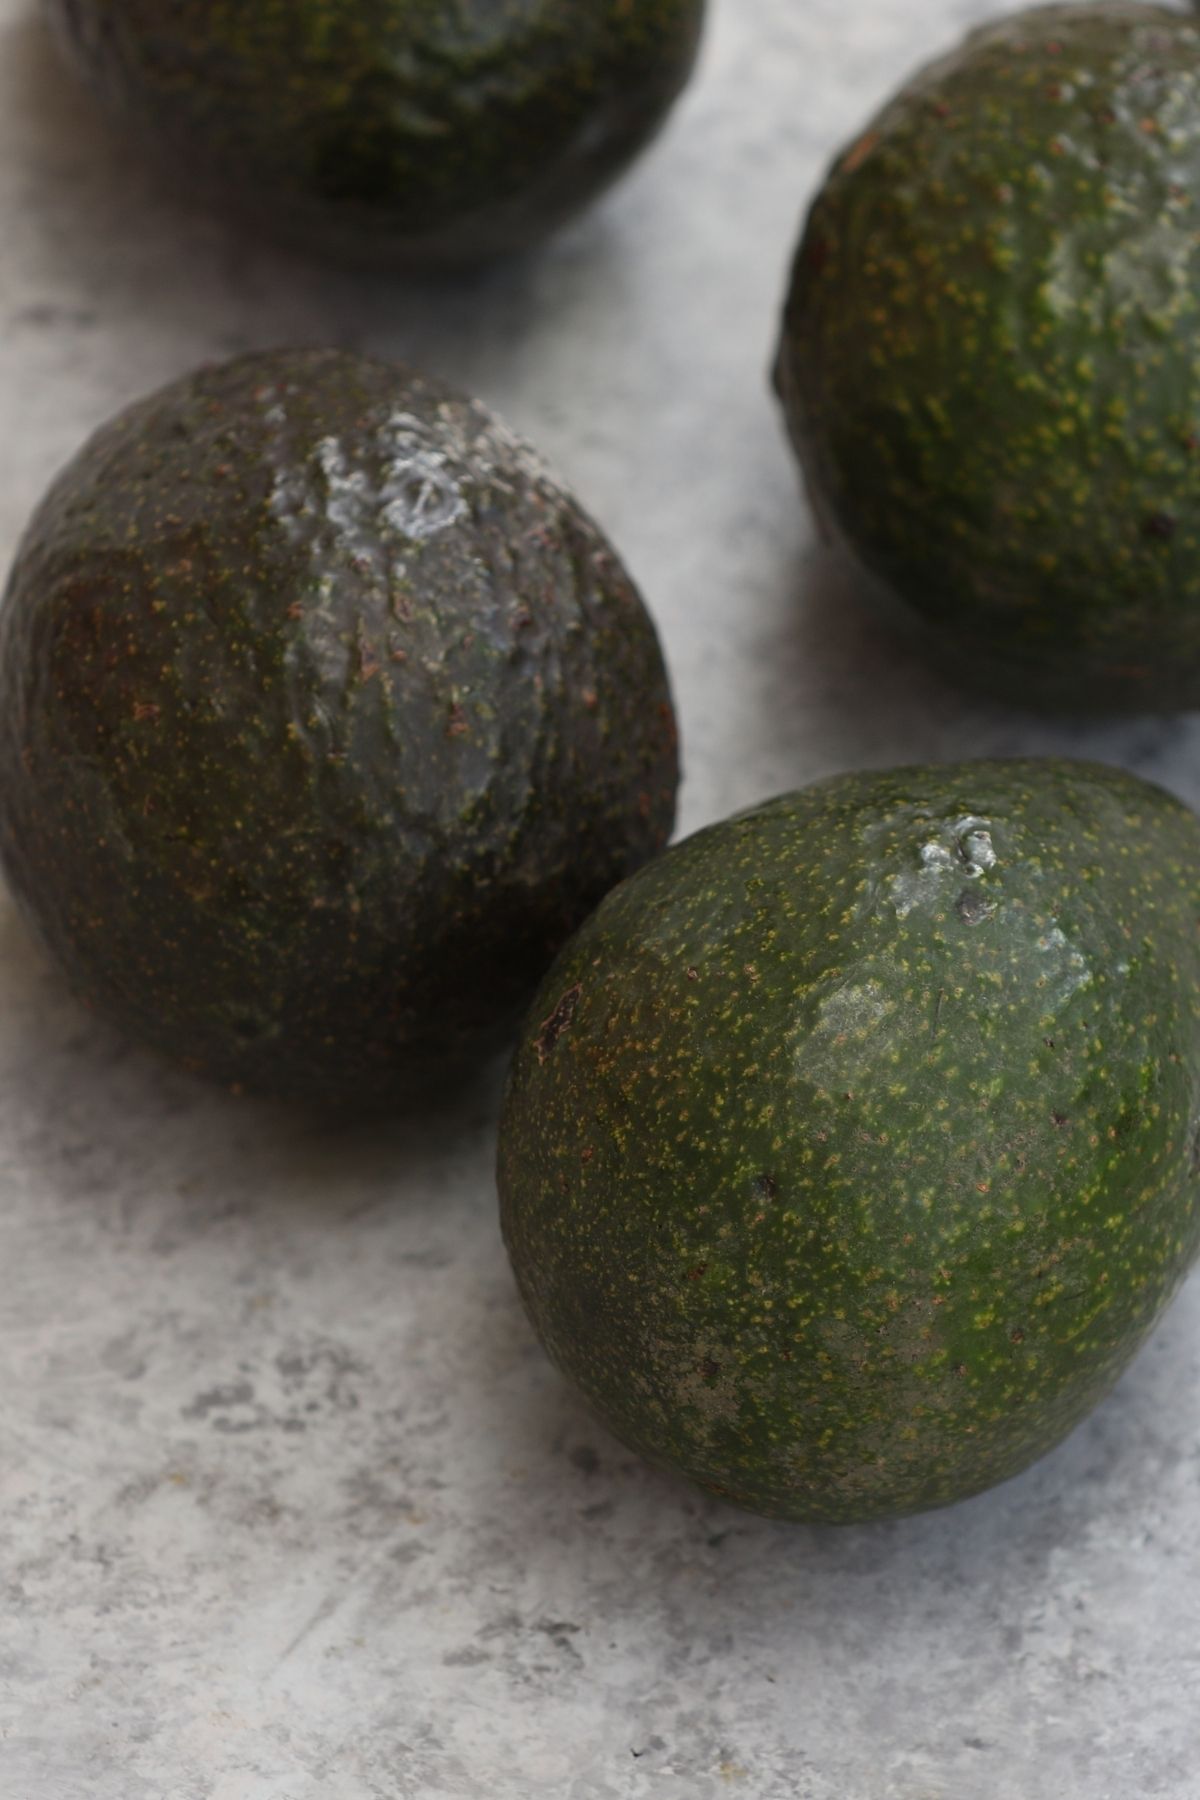 Learn how to ripen avocados quickly! This step-by-step guide shows you how to tell if an avocado is ripe along with 4 easy methods for ripening them faster. Enjoy the delicious and creamy ripe avocados every time!